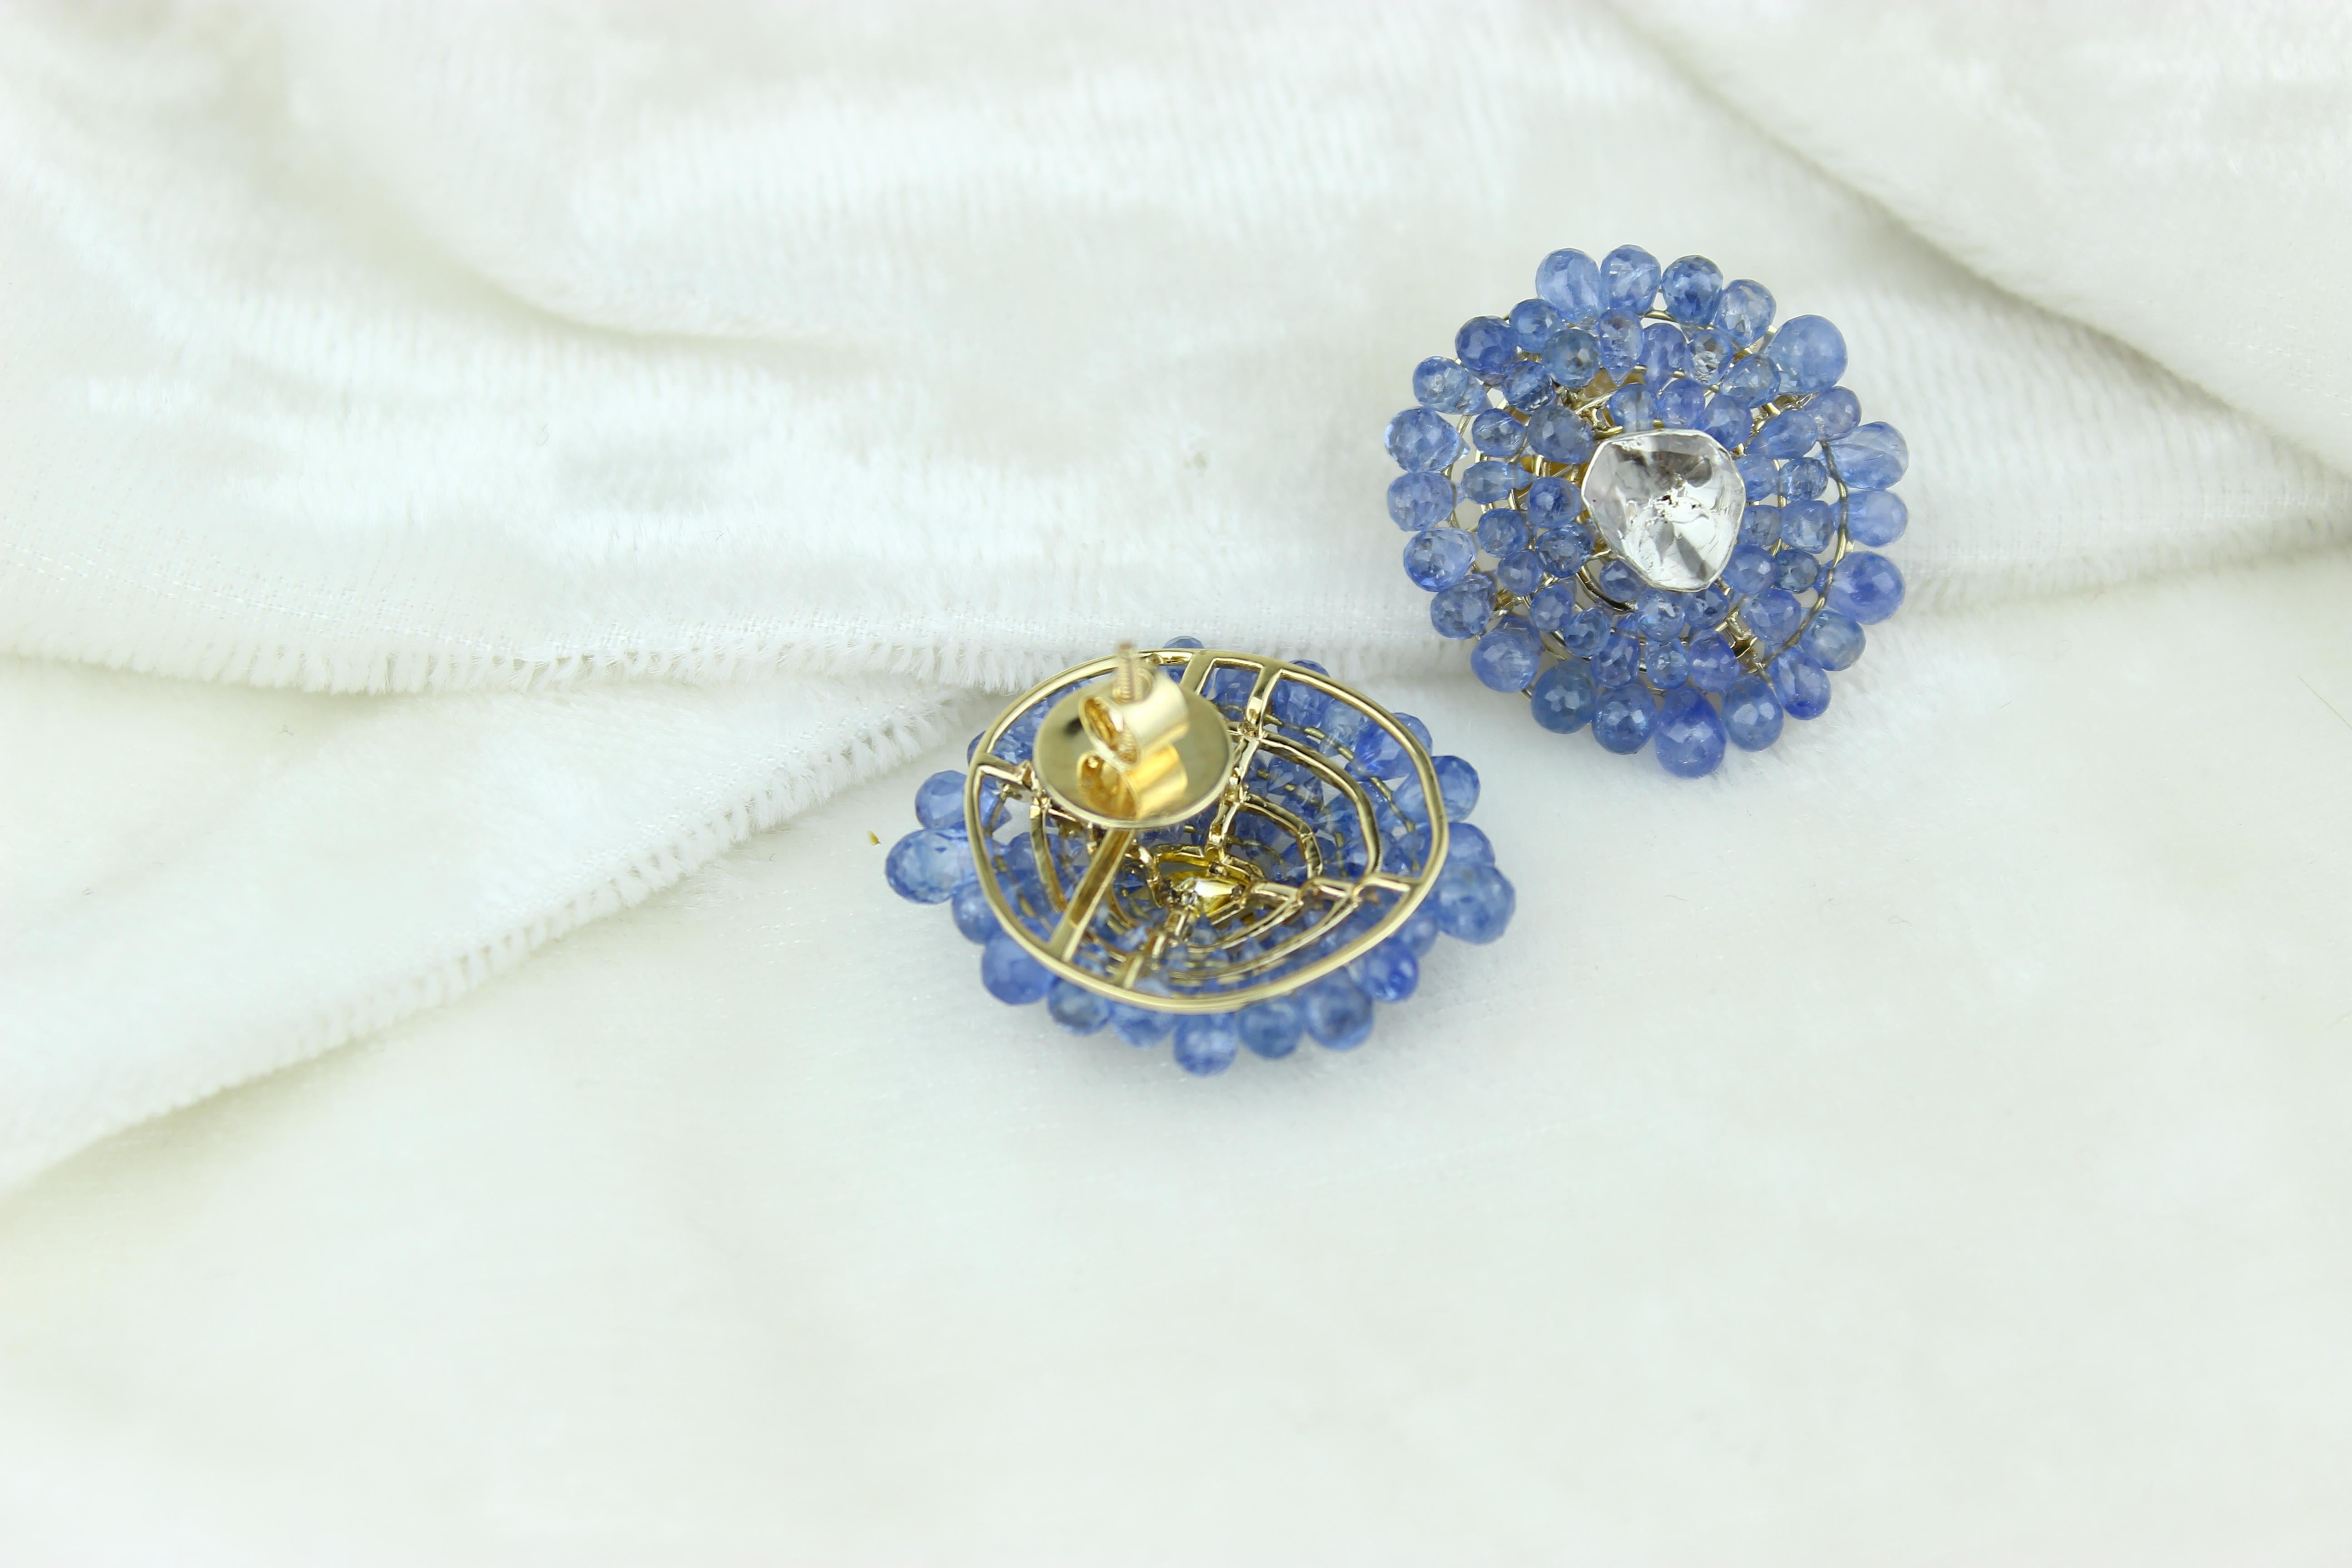 Floral Stud Polki Earrings with Blue Briolletes Gemstone set in 18k Solid Gold In New Condition For Sale In New Delhi, DL